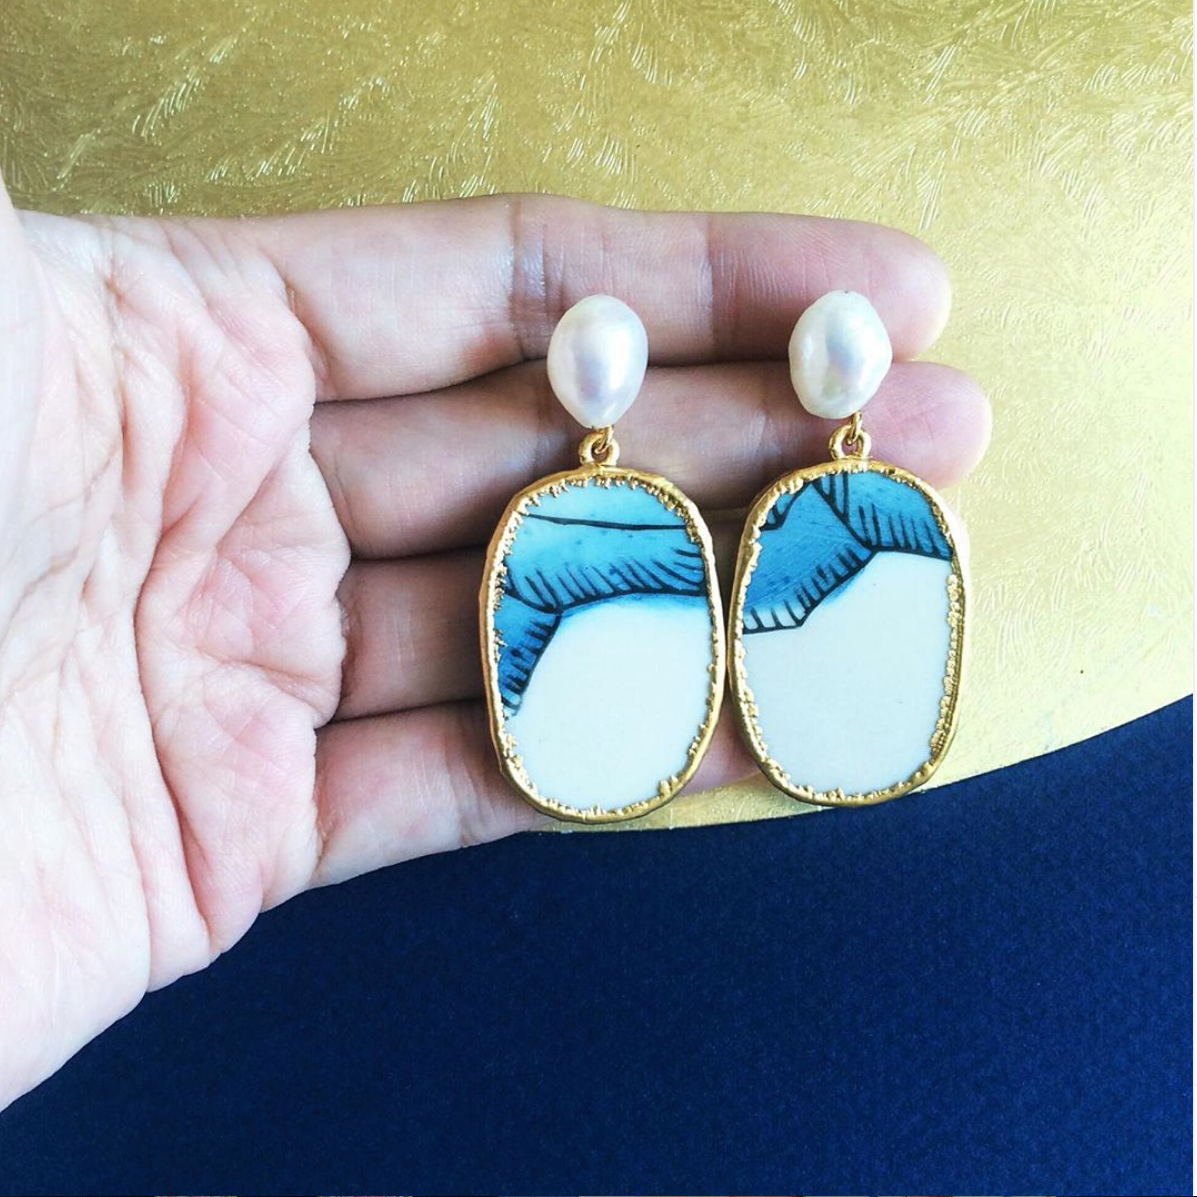 Rock Face Porcelain And Freshwater Pearl Earrings